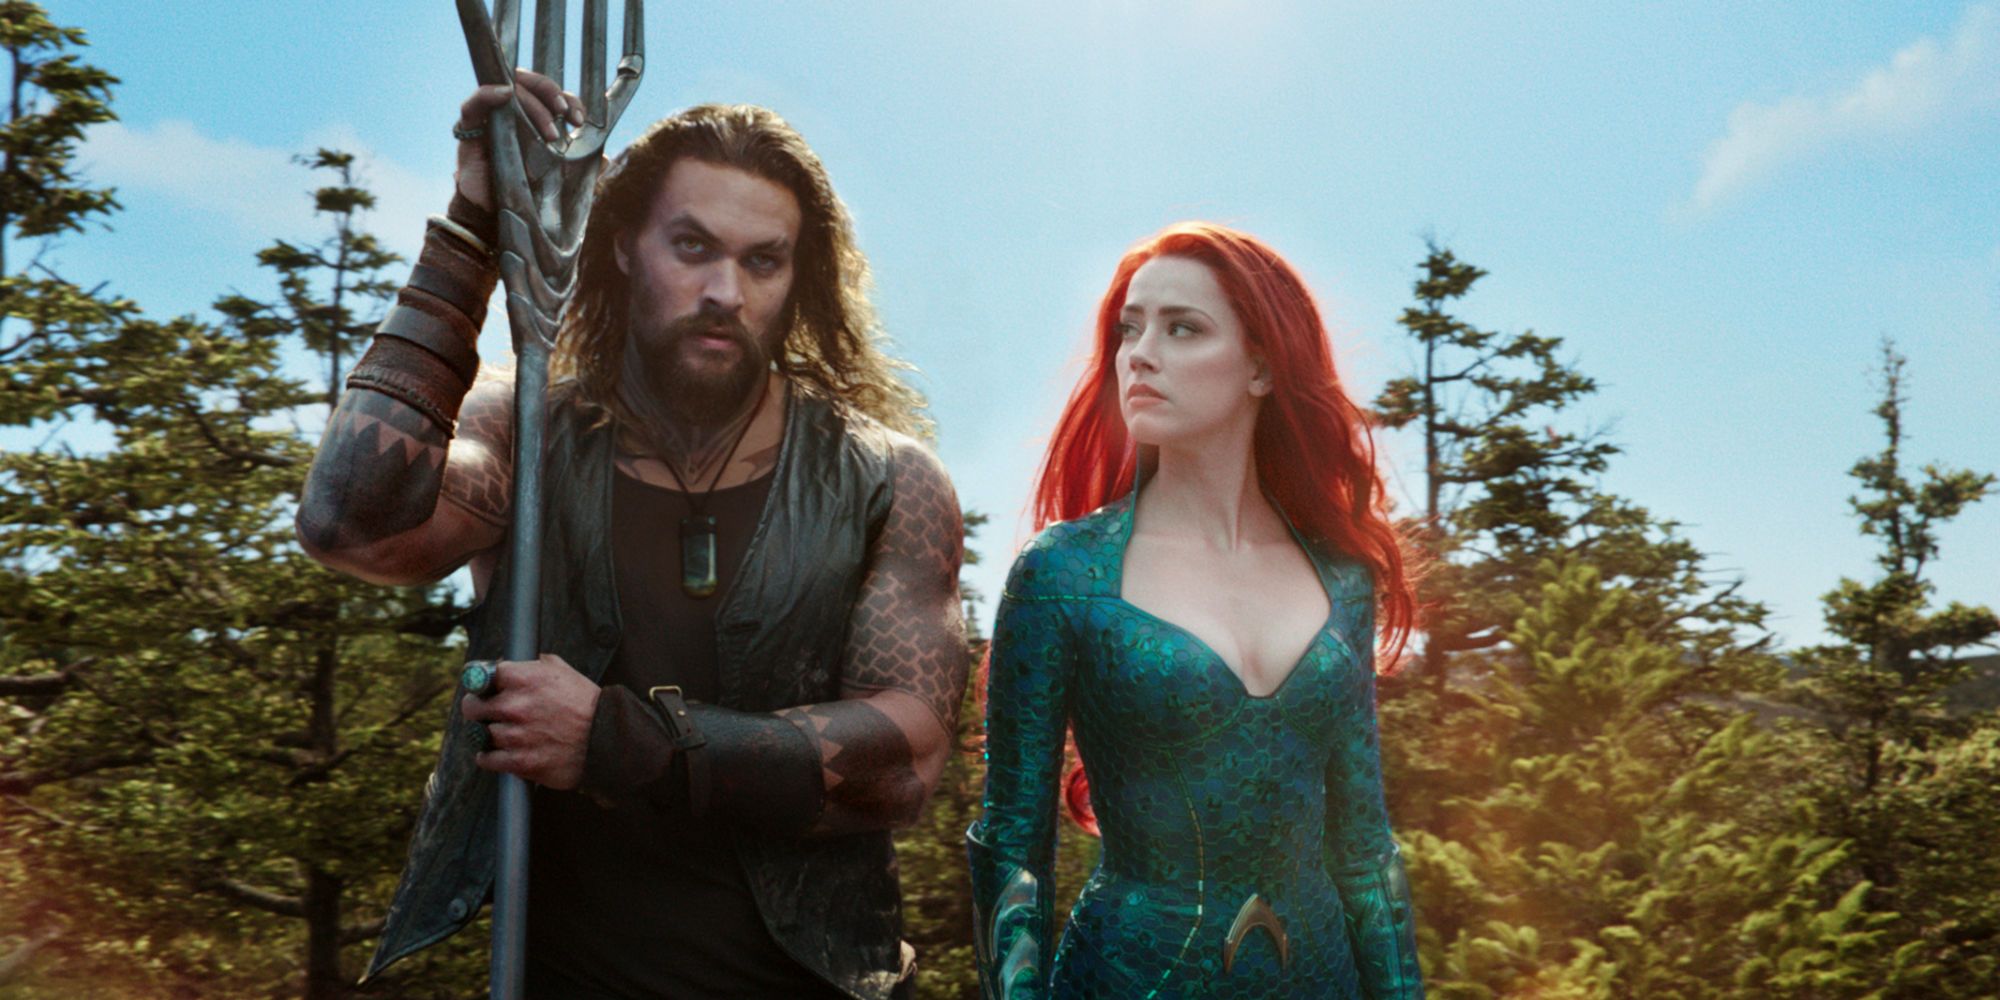 Aquaman Early Reviews: DC’s Latest is Messy, Weird & Lots of Fun